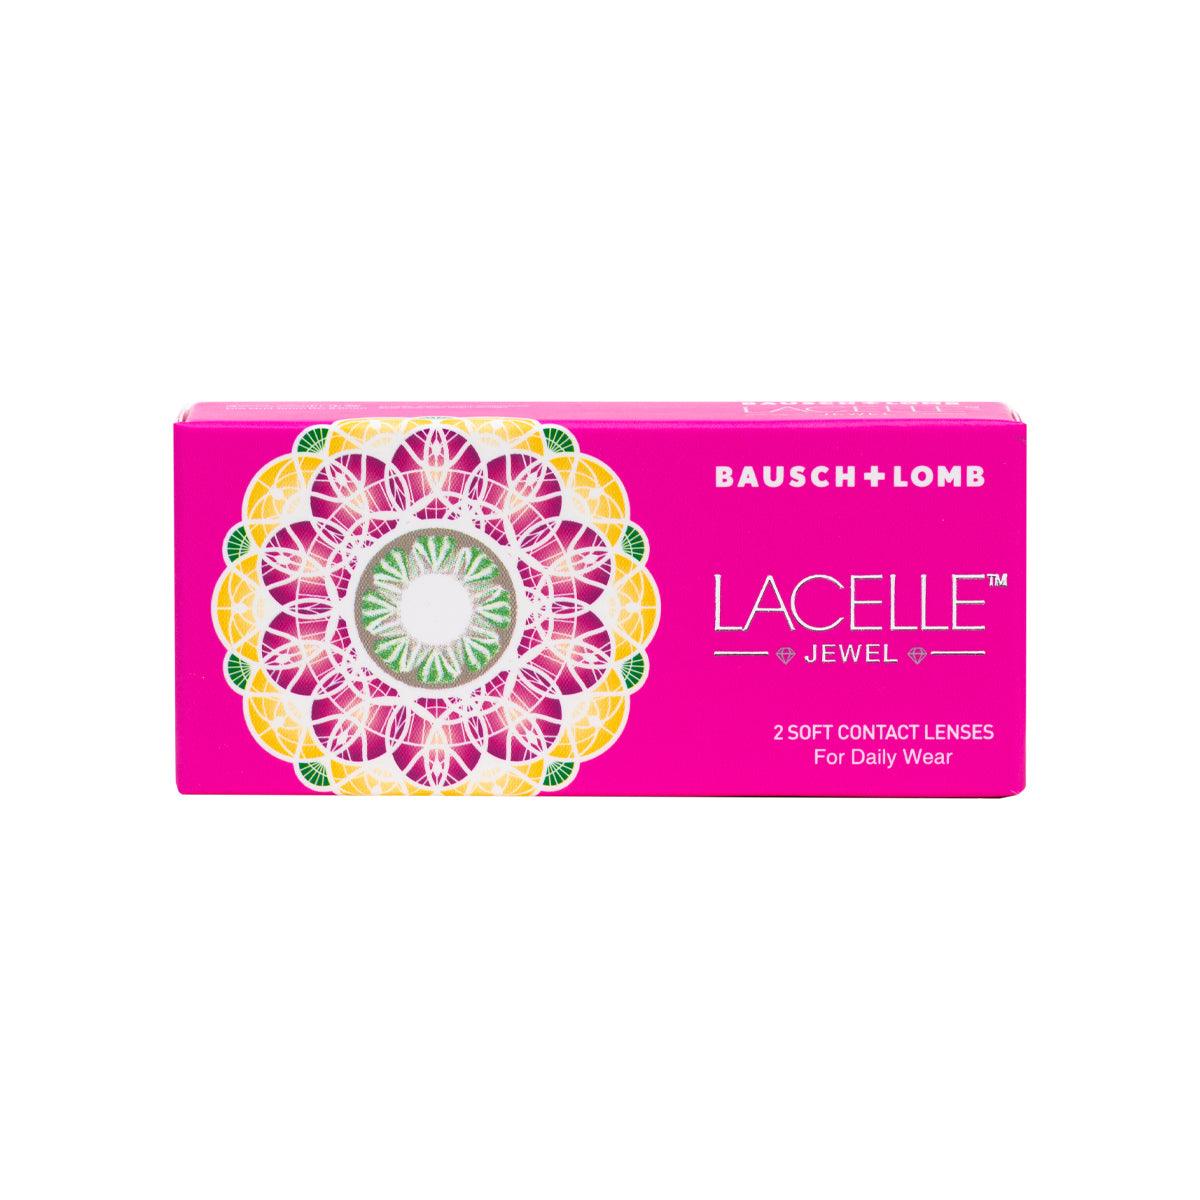 Bausch + Lomb Lacelle Jewel Gray - TA-TO.com